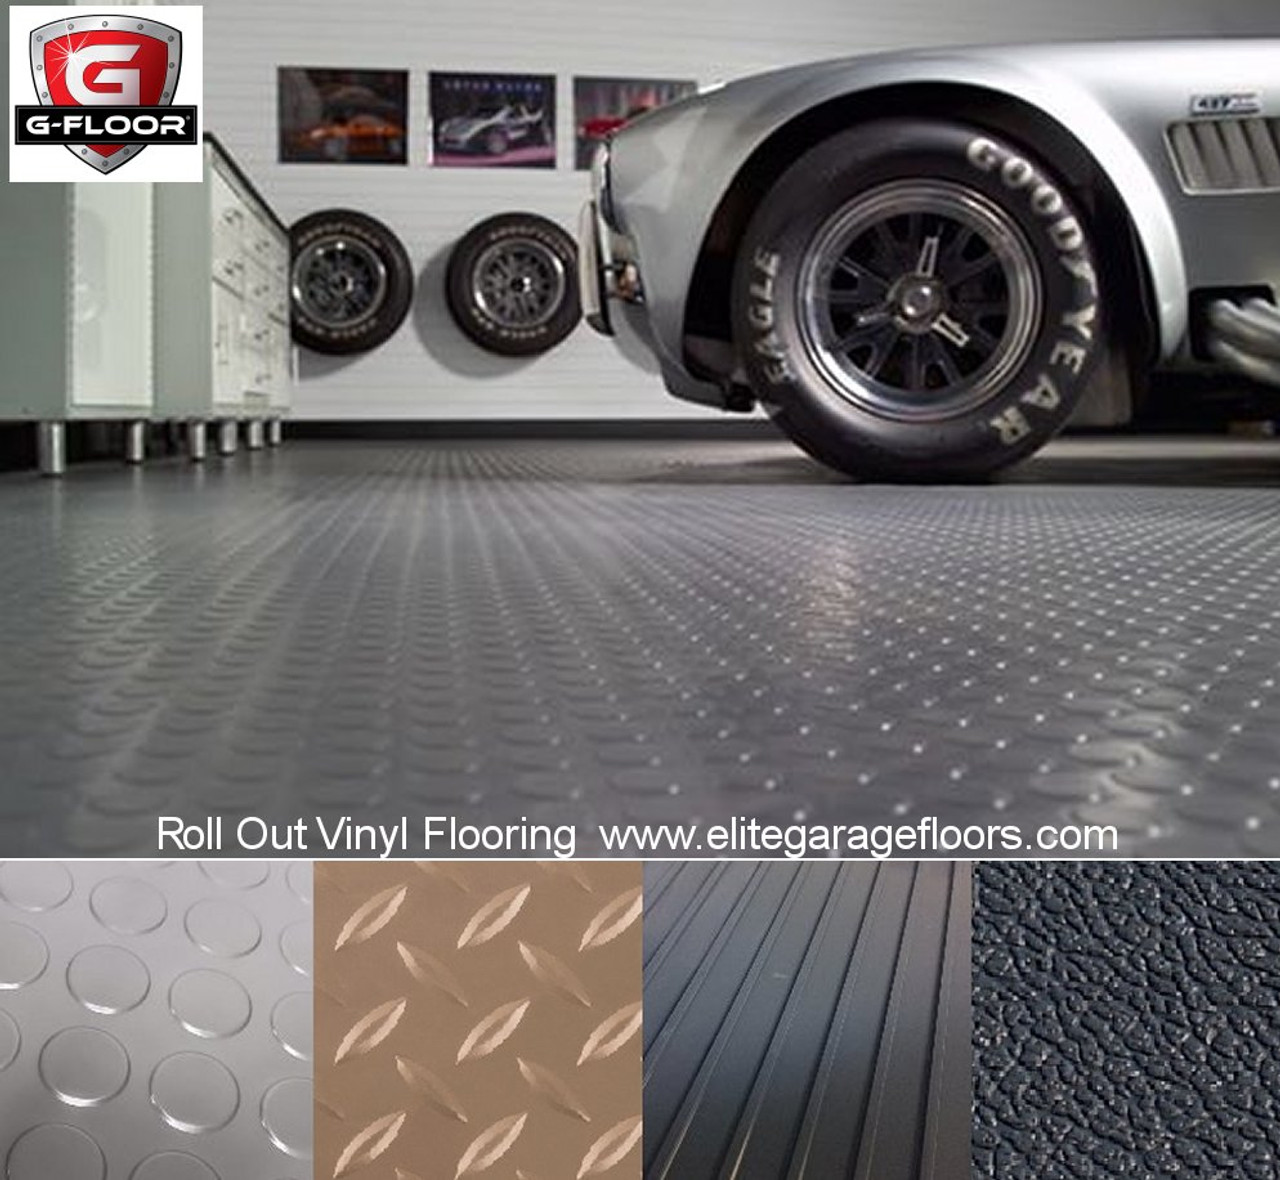 G Floor Vinyl Roll Out Flooring comes in many pattern and color options.